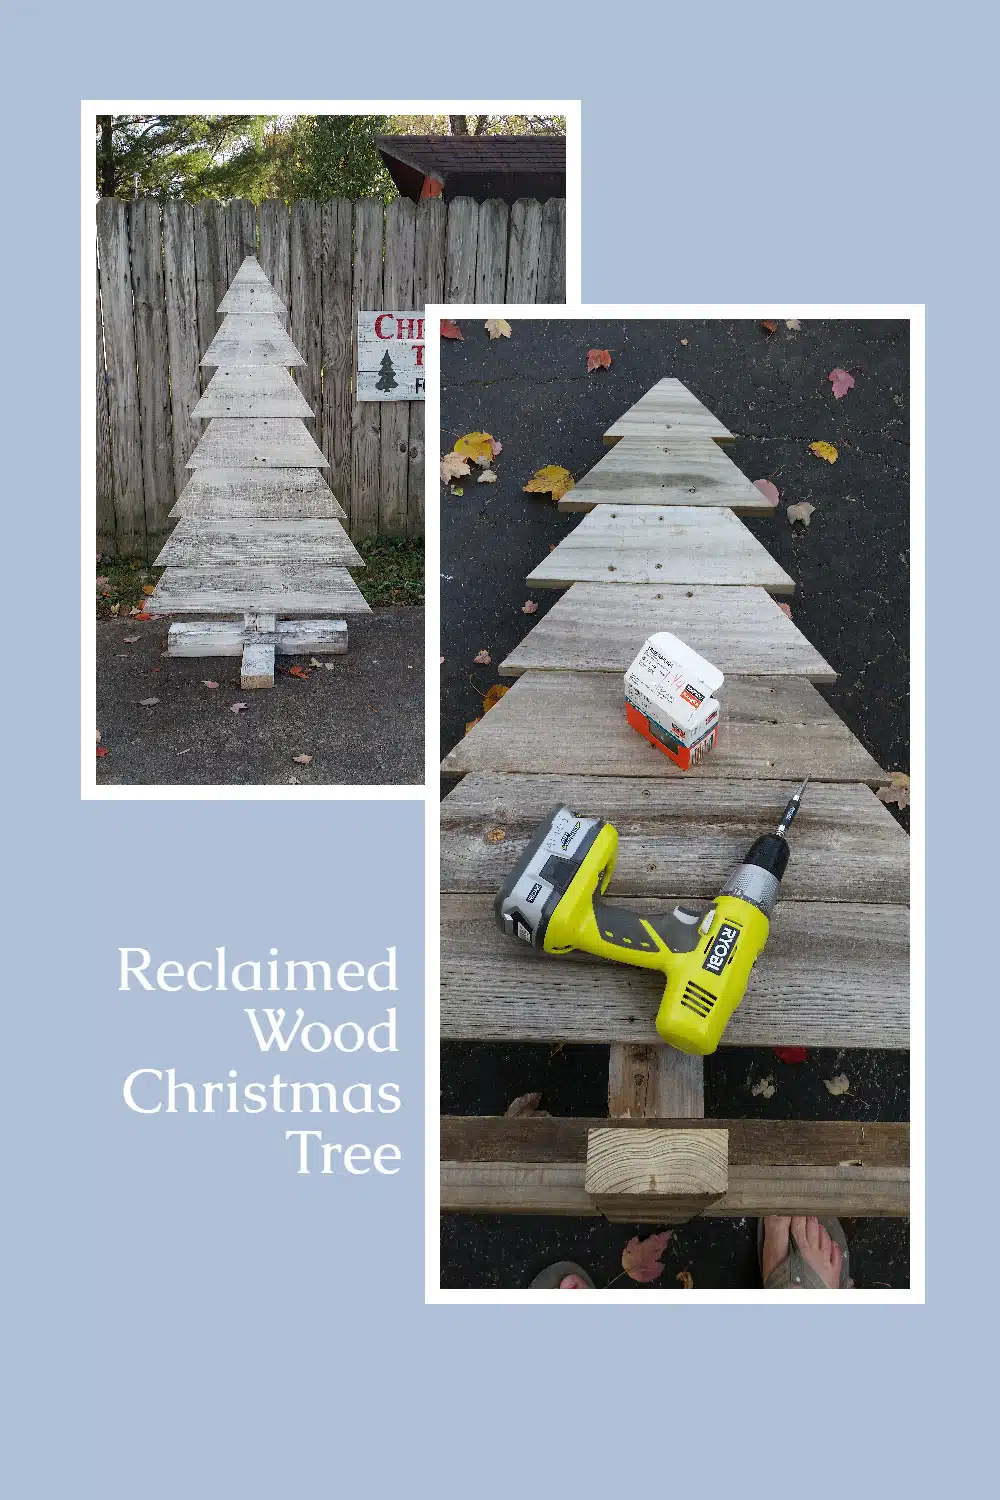 Making a pallet Christmas tree is easy, even if you don't have pallet wood. I used reclaimed fence boards to make this indoor outdoor Christmas tree. #MyRepurposedLife #pallet #reclaimedwood #christmas #christmastree via @repurposedlife